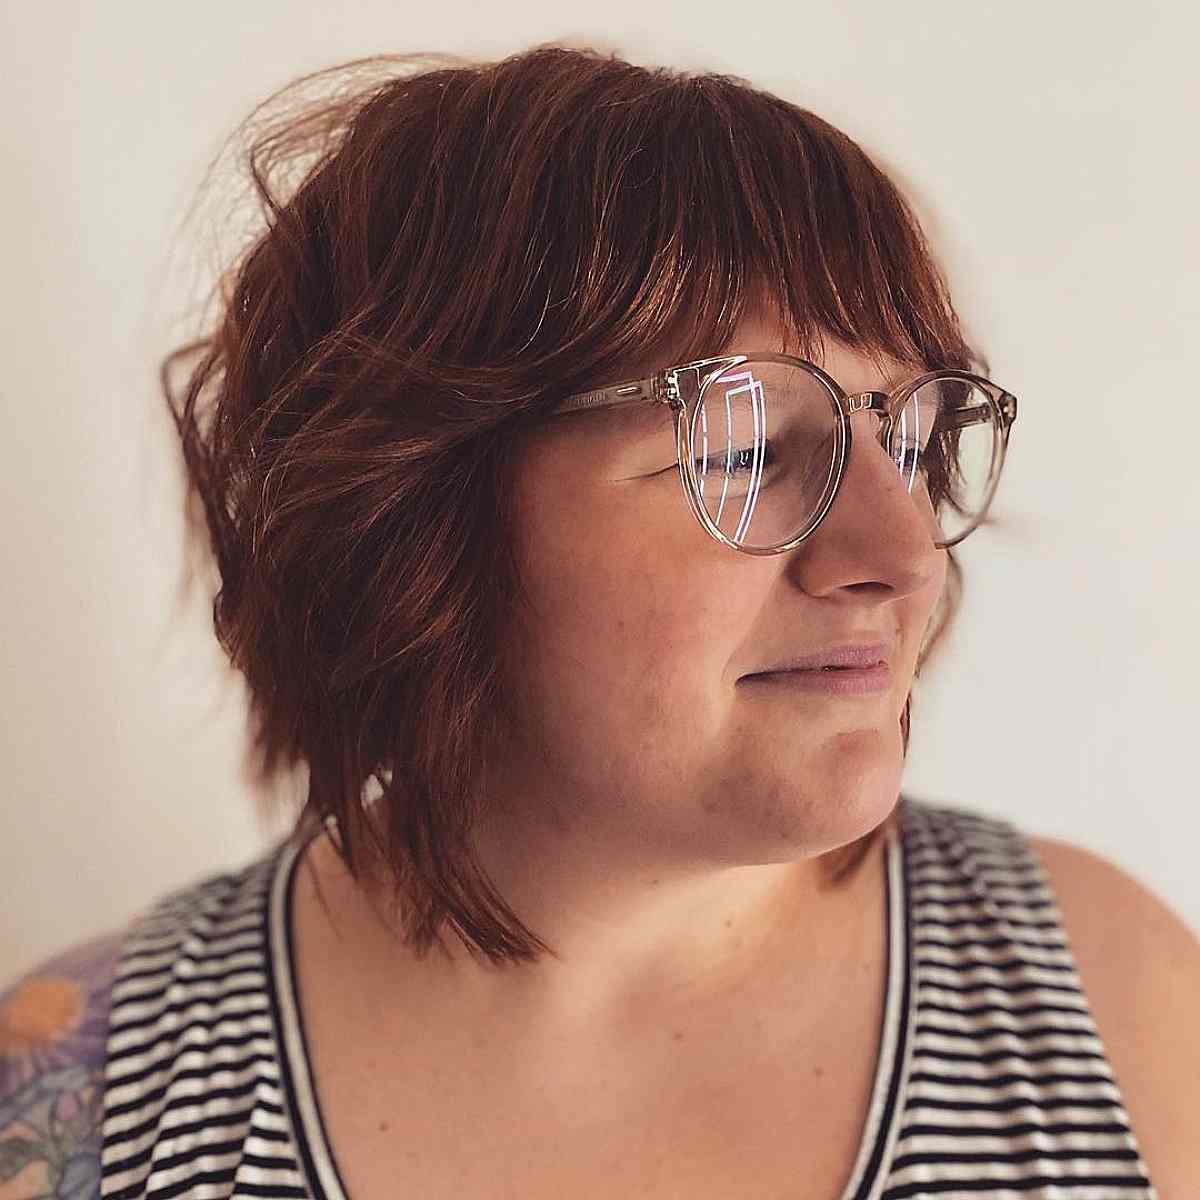 Graduated and Layered Shaggy Bob with Bangs for a Chubby Face